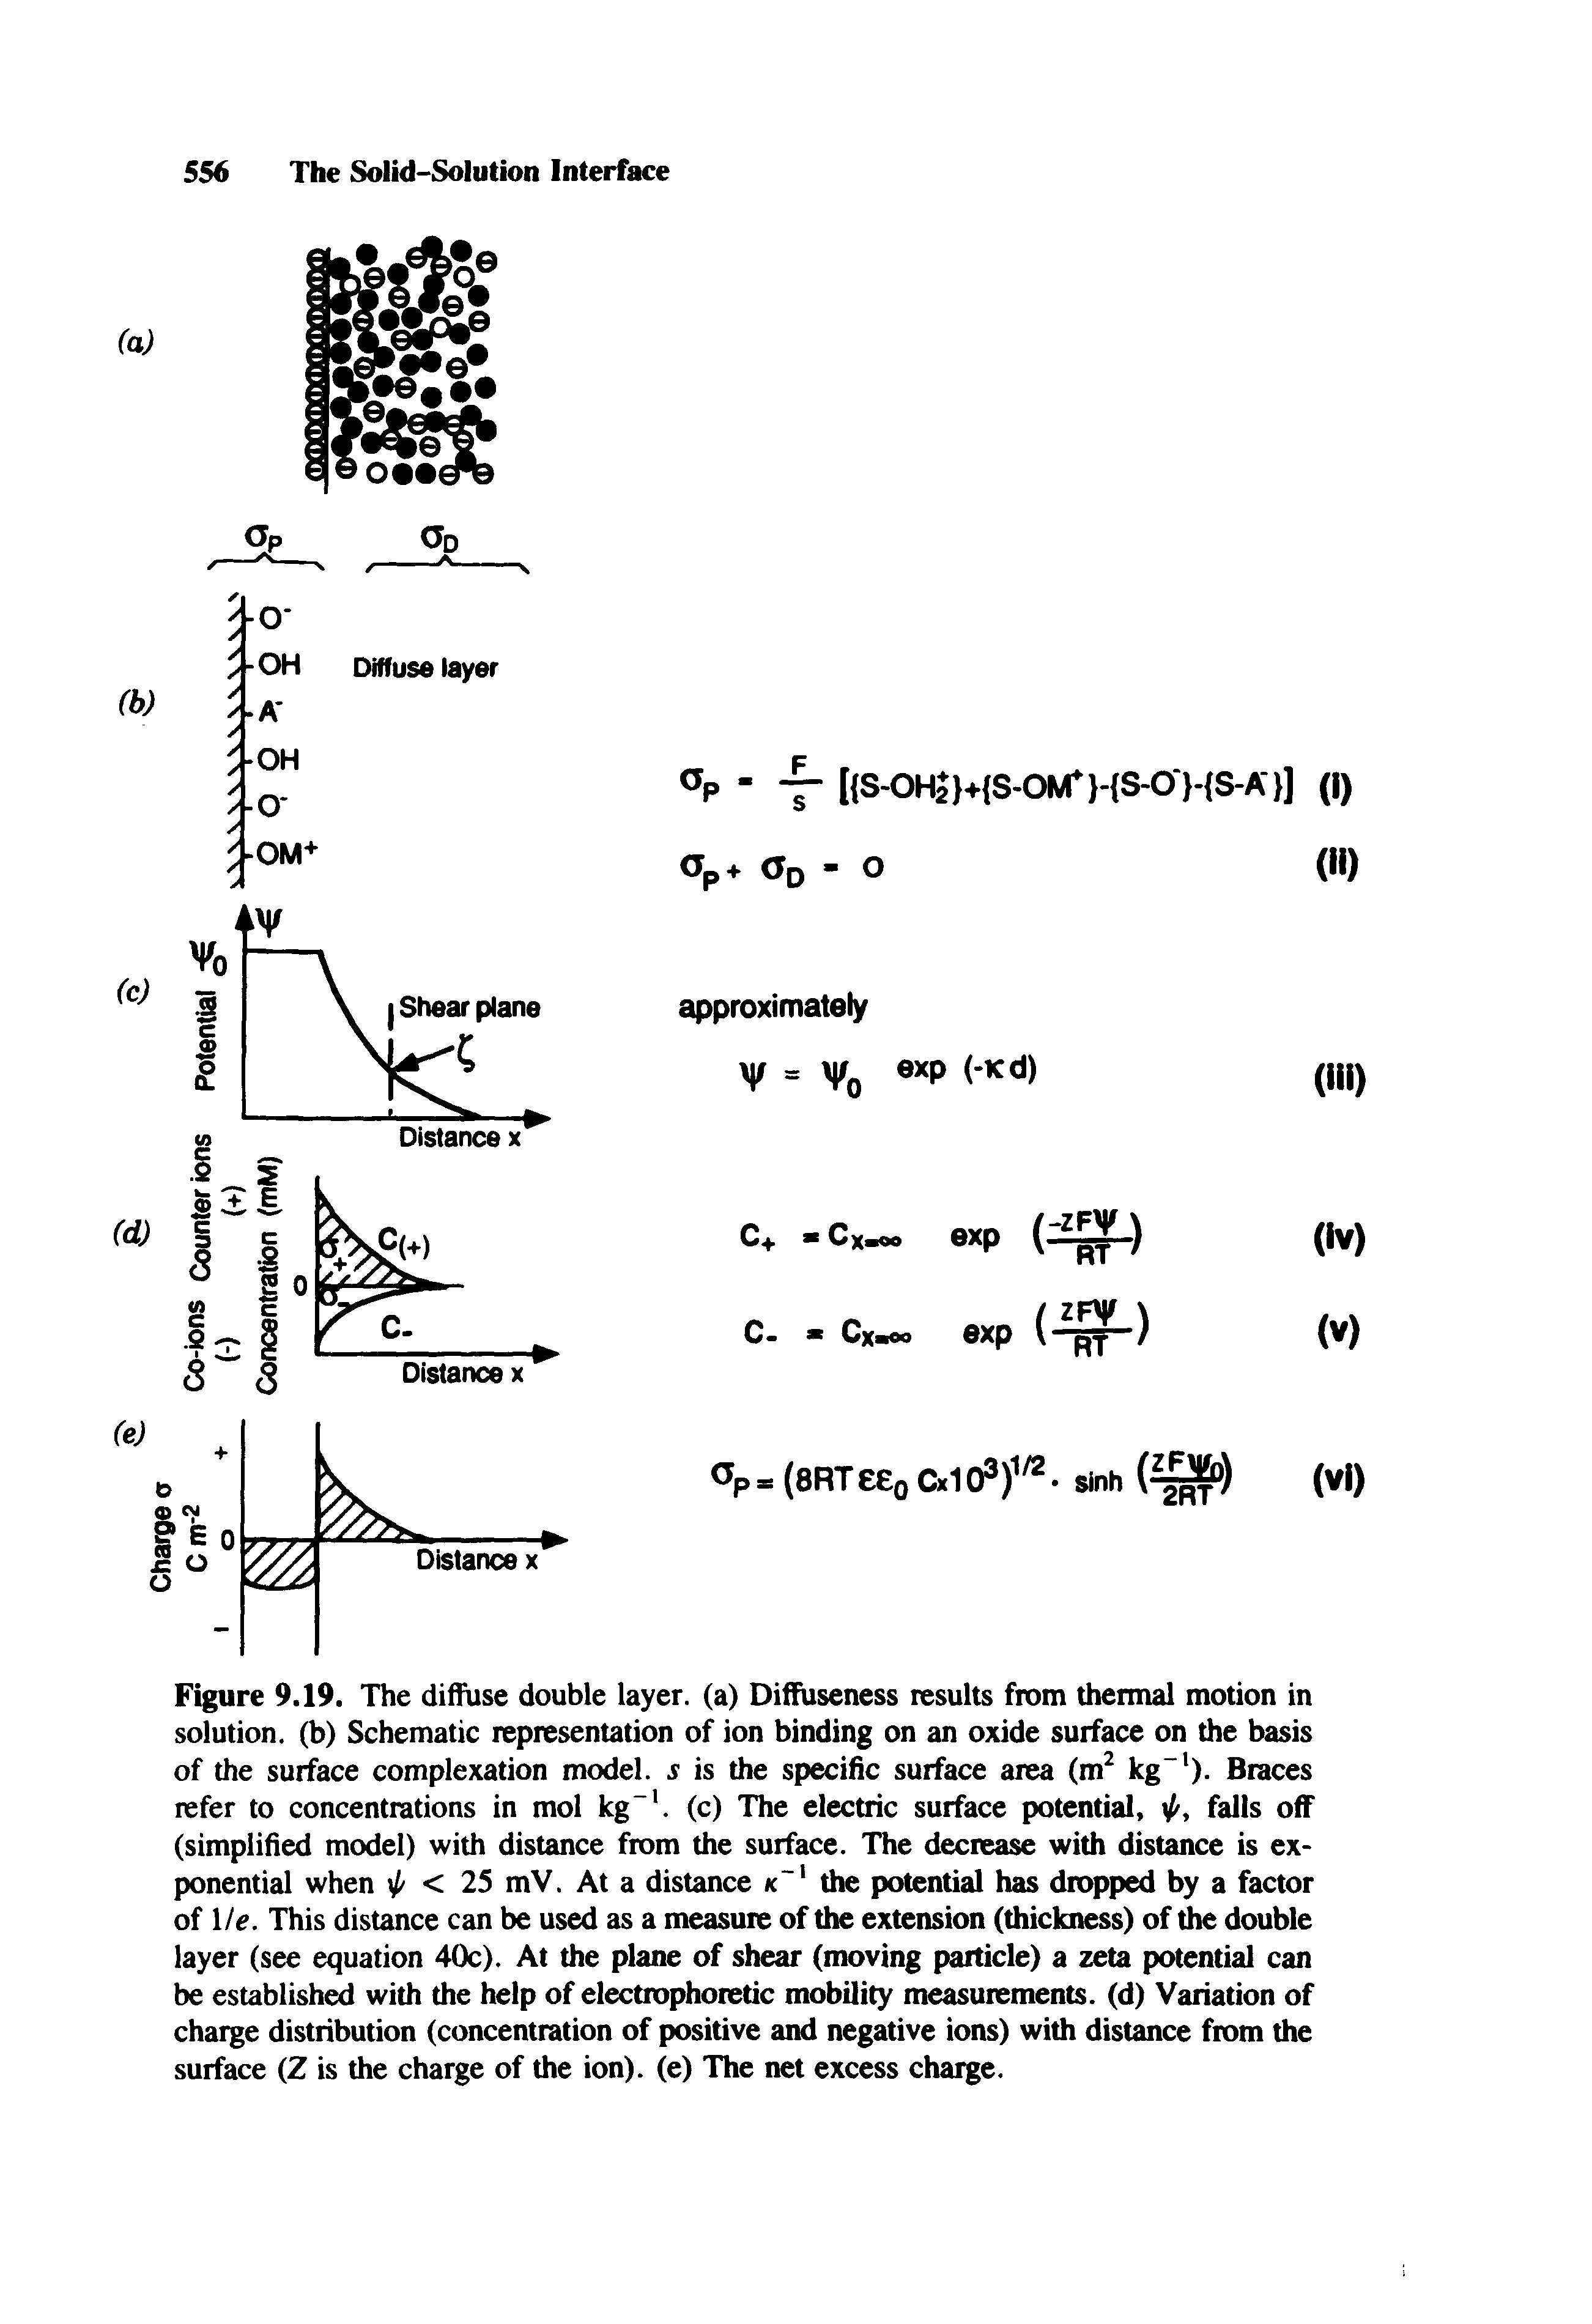 Figure 9.19. The diffuse double layer, (a) Diffuseness results from thermal motion in solution, (b) Schematic representation of ion binding on an oxide surface on the basis of the surface complexation model, s is the specific surface area (m kg ). Braces refer to concentrations in mol kg . (c) The electric surface potential, falls off (simplified model) with distance from the surface. The decrease with distance is exponential when l/ < 25 mV. At a distance k the potential has dropped by a factor of 1/c. This distance can be used as a measure of the extension (thickness) of l e double layer (see equation 40c). At the plane of shear (moving particle) a zeta potential can be established with the help of electrophoretic mobility measurements, (d) Variation of charge distribution (concentration of positive and negative ions) with distance from the surface (Z is the charge of the ion), (e) The net excess charge.